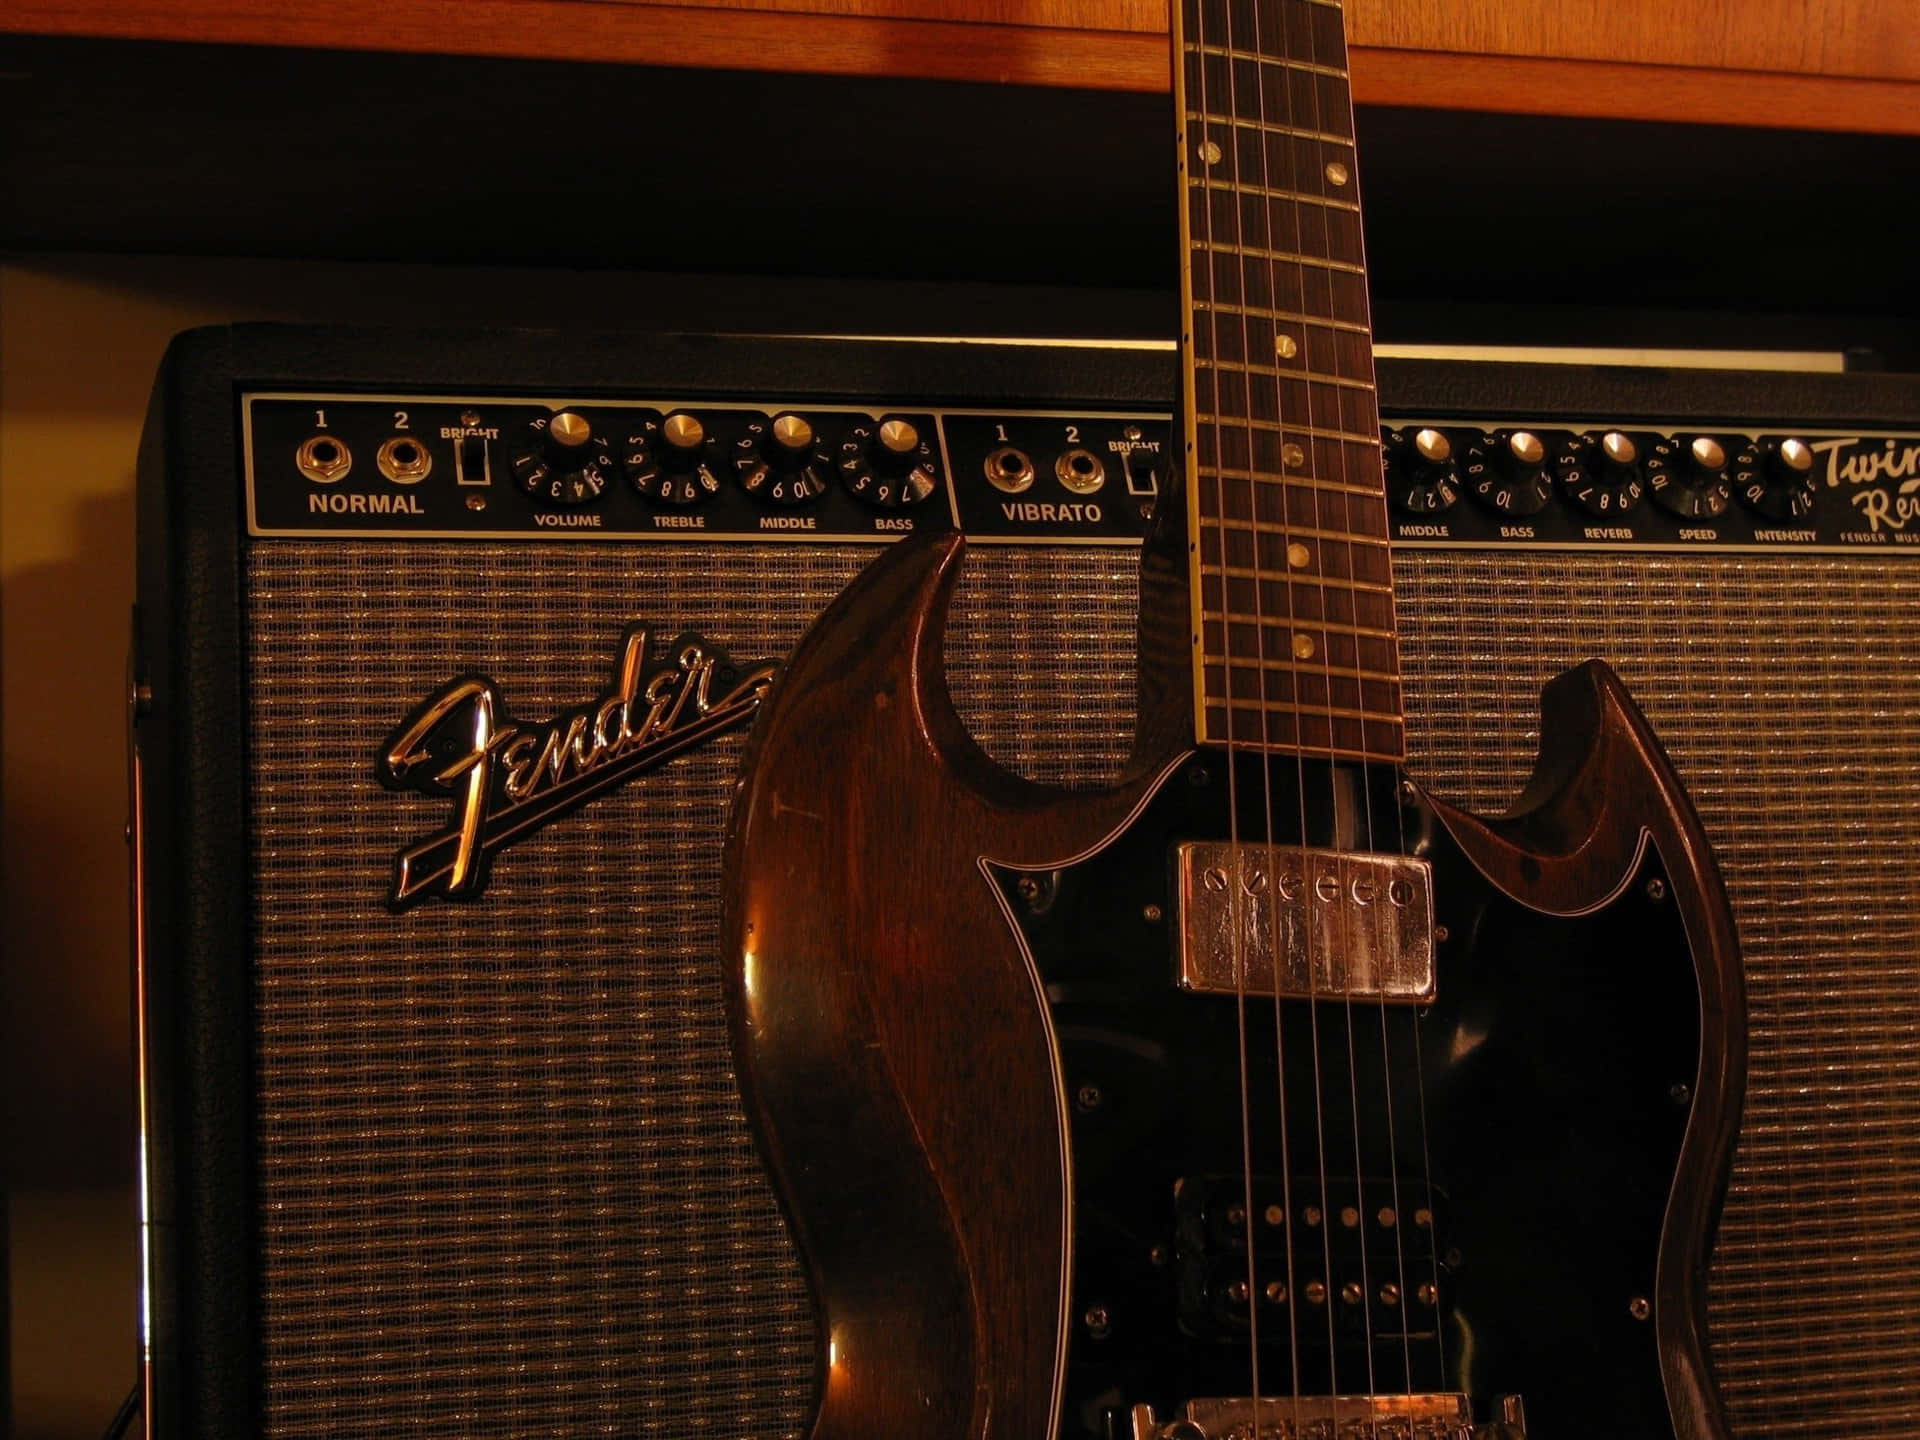 Get ready for the ultimate musical experience with this powerful Guitar Amp Wallpaper